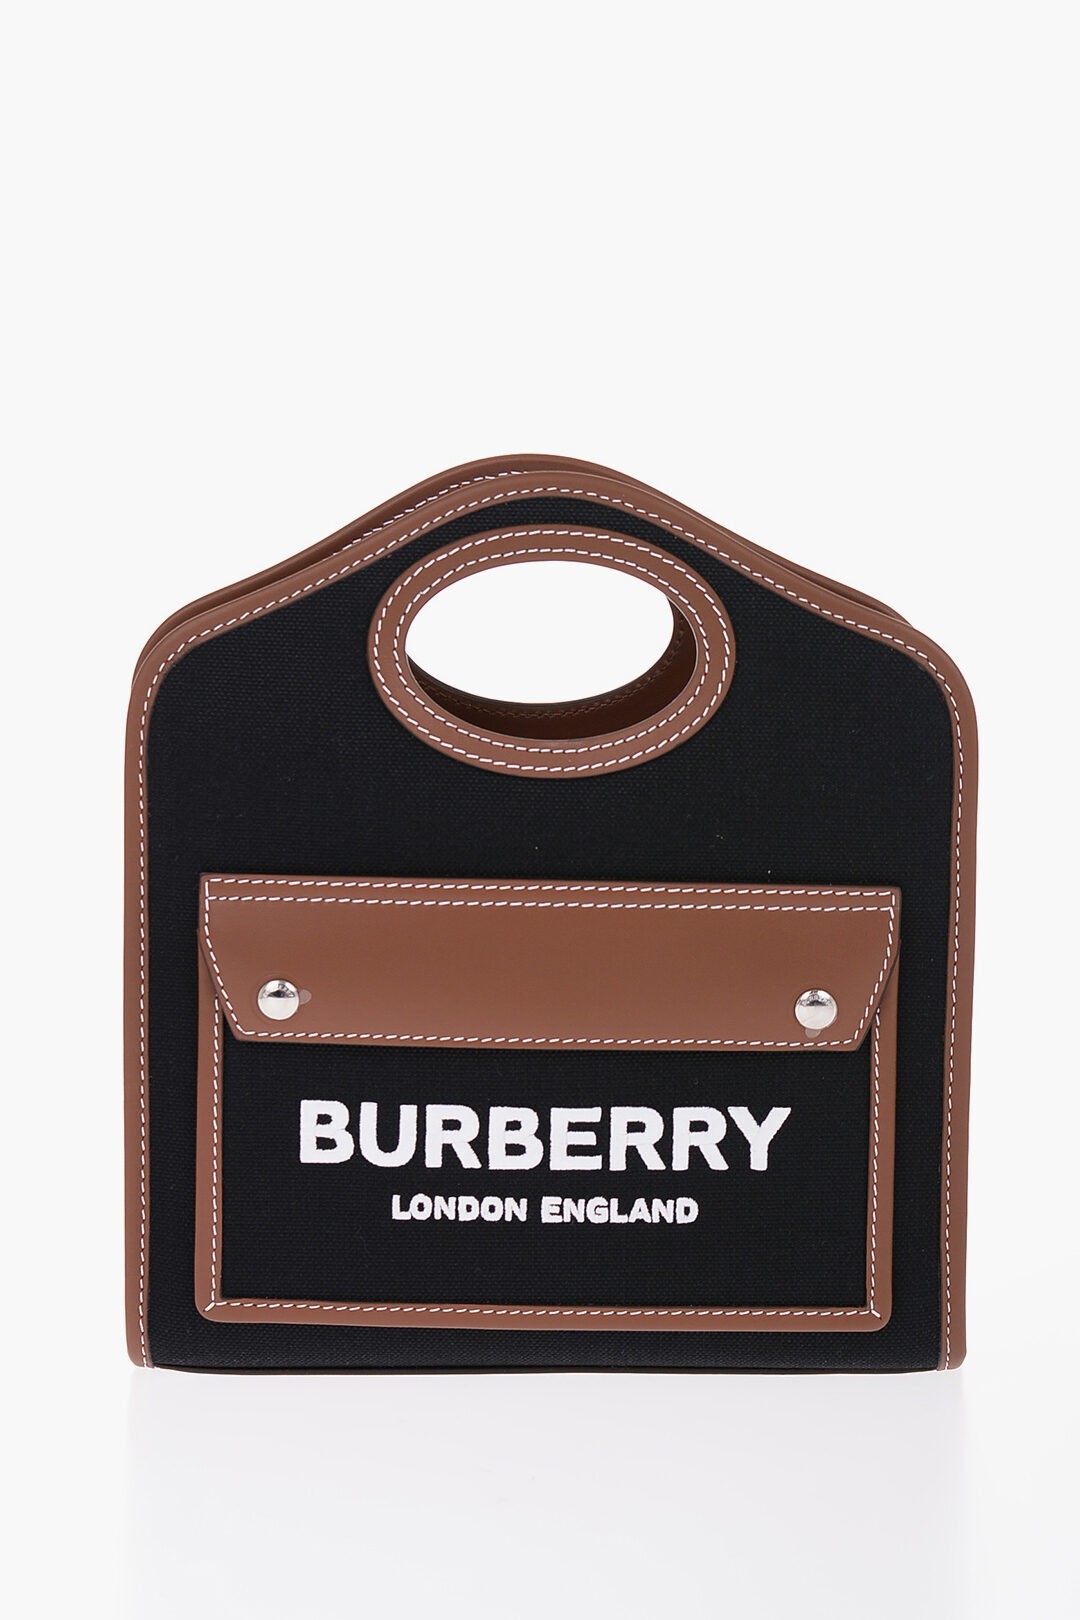 BURBERRY バーバリー バッグ 8055746 BLACKTAN レディース COTTON HAND BAG WITH LEATHER TRIMS 【関税・送料無料】【ラッピング無料】 dk